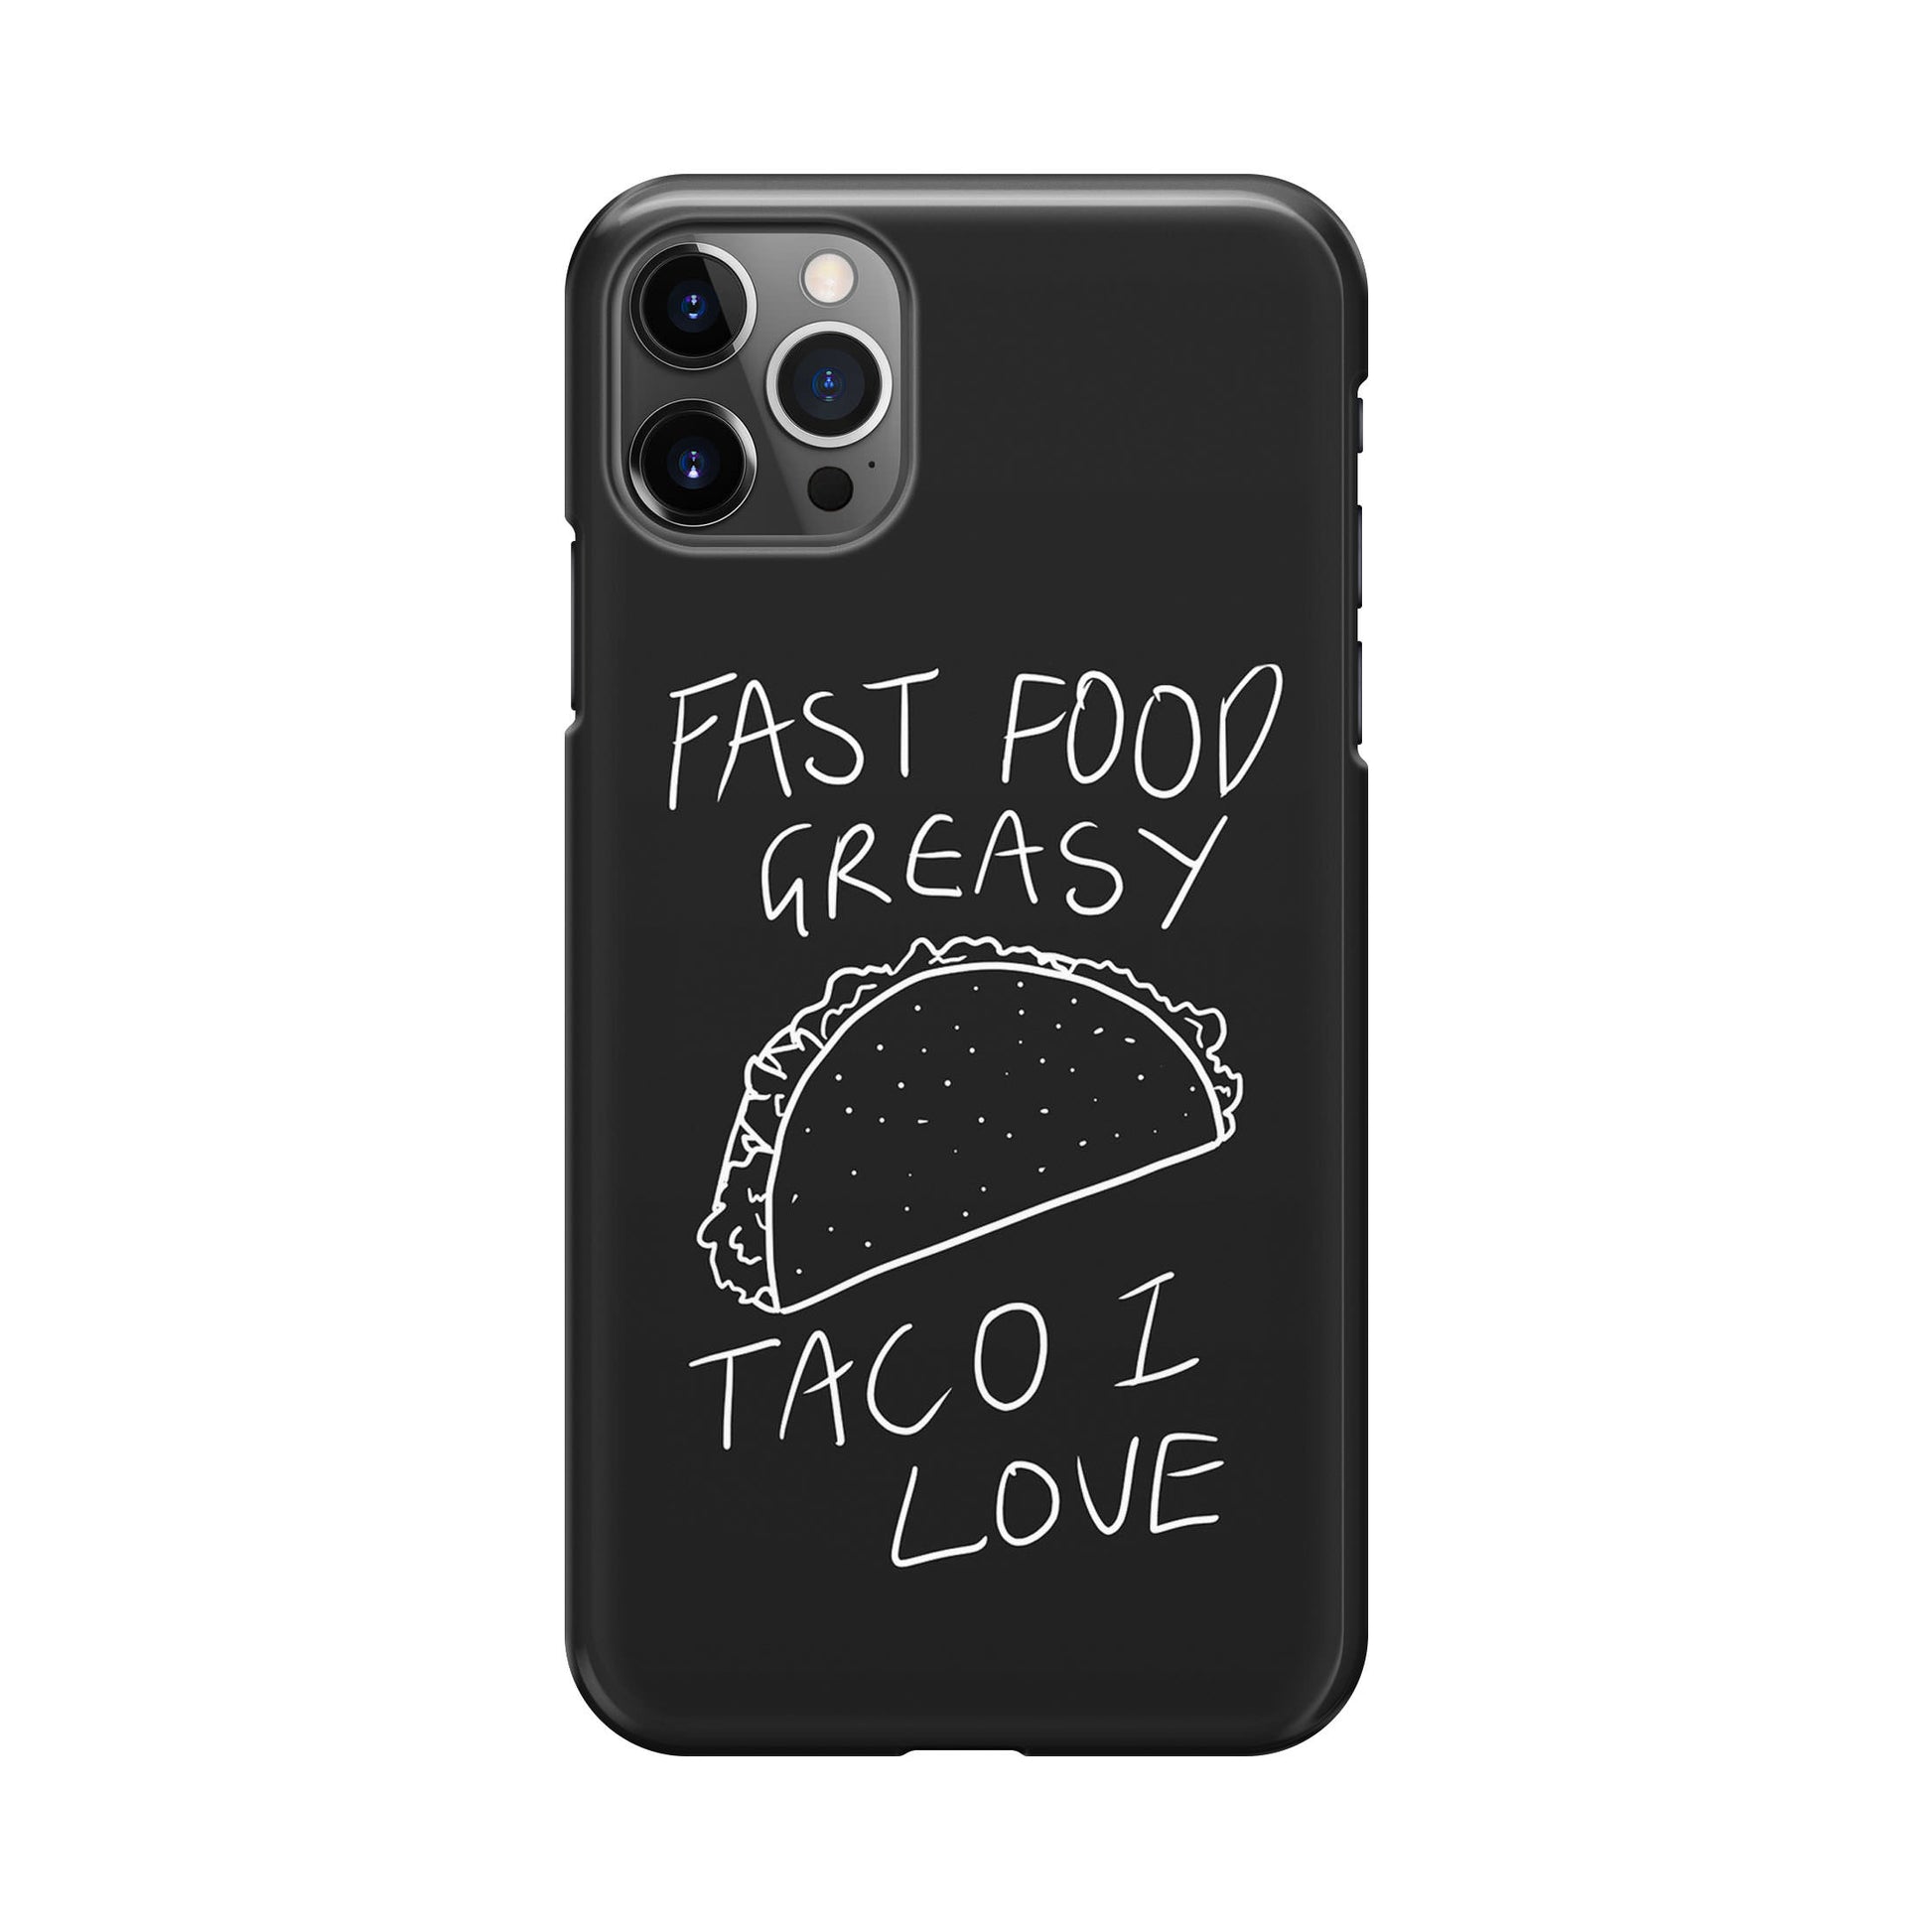 Taco Lover iPhone 12 Pro Case